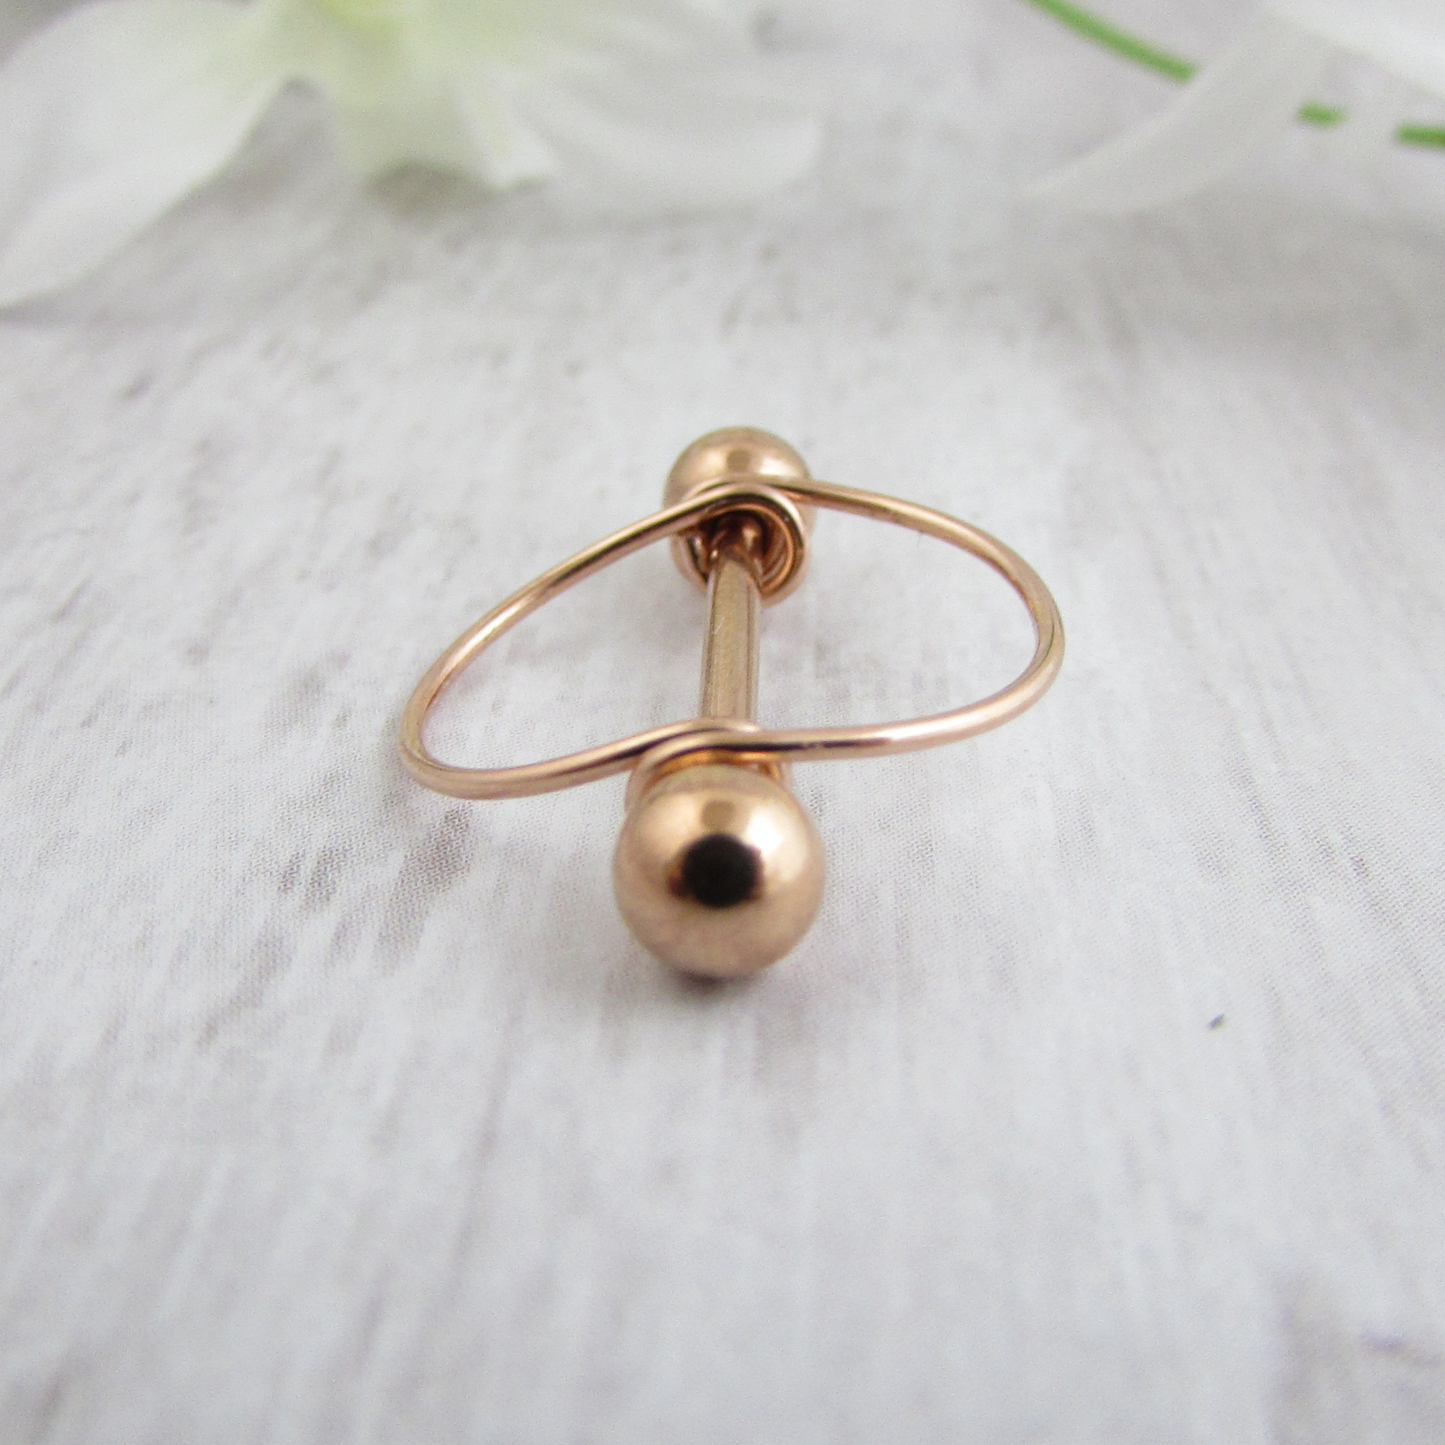 14g Rose Gold IP 316L Stainless Steel Round Frame Nipple Ring